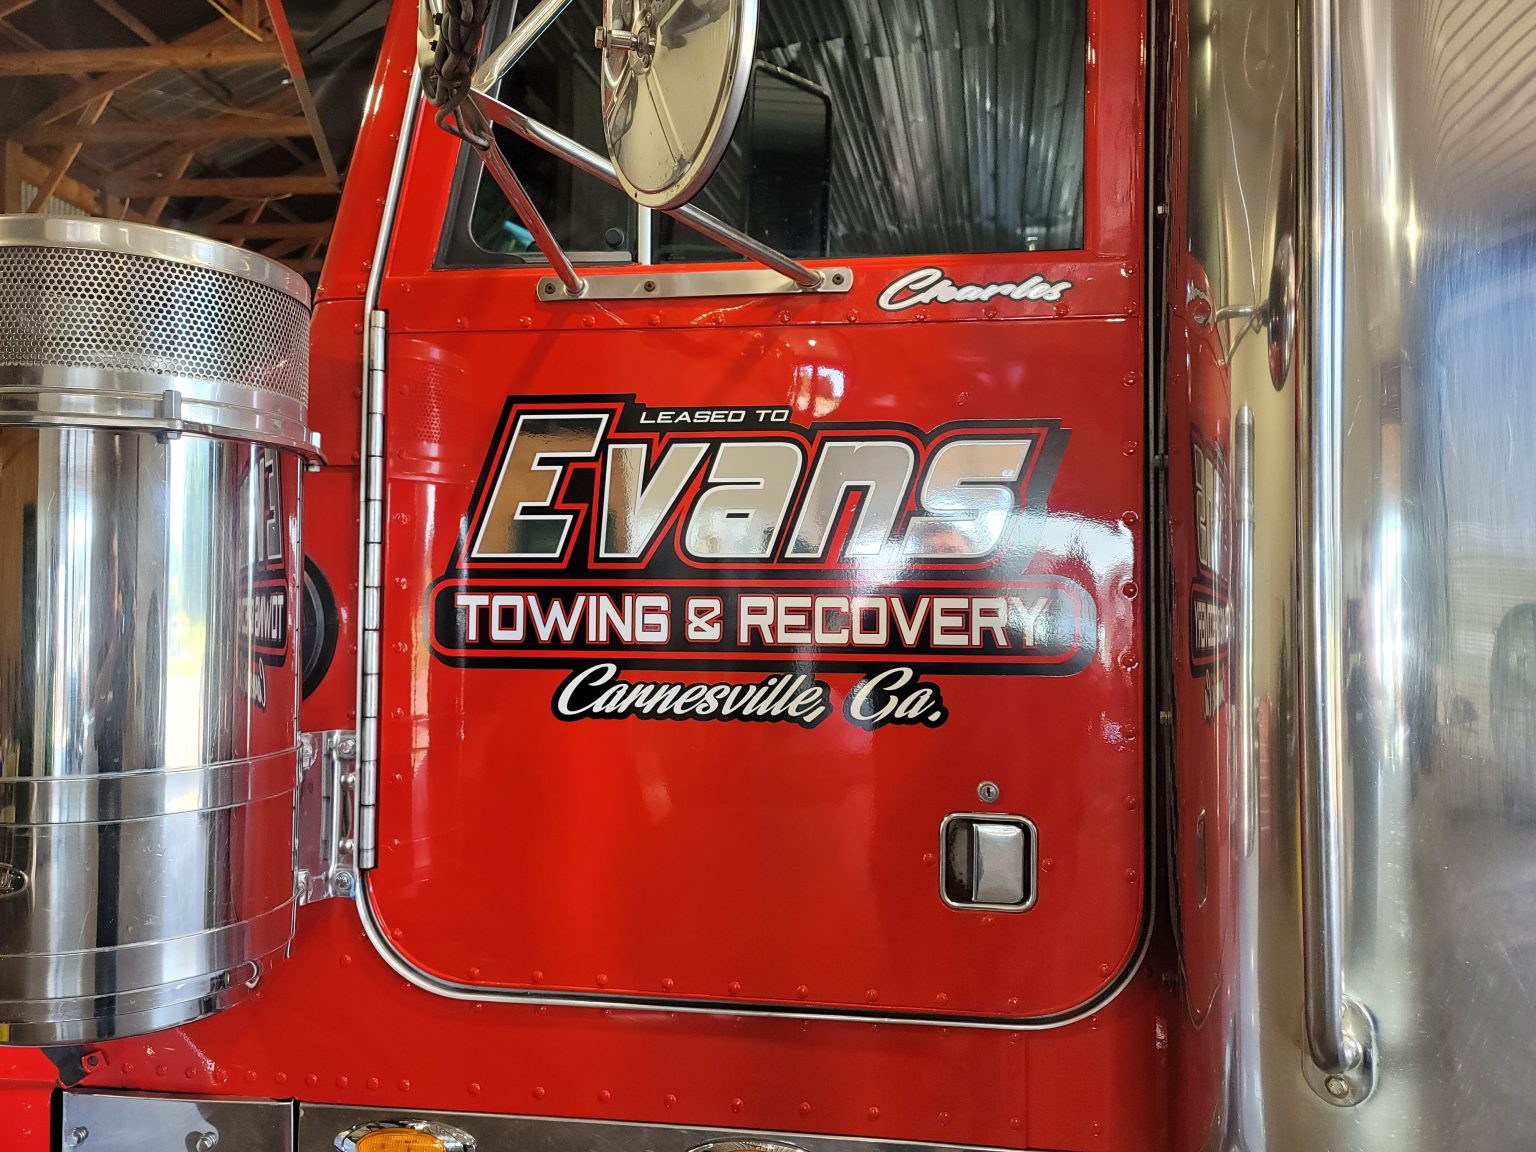 Evans Towing & Recovery (6)